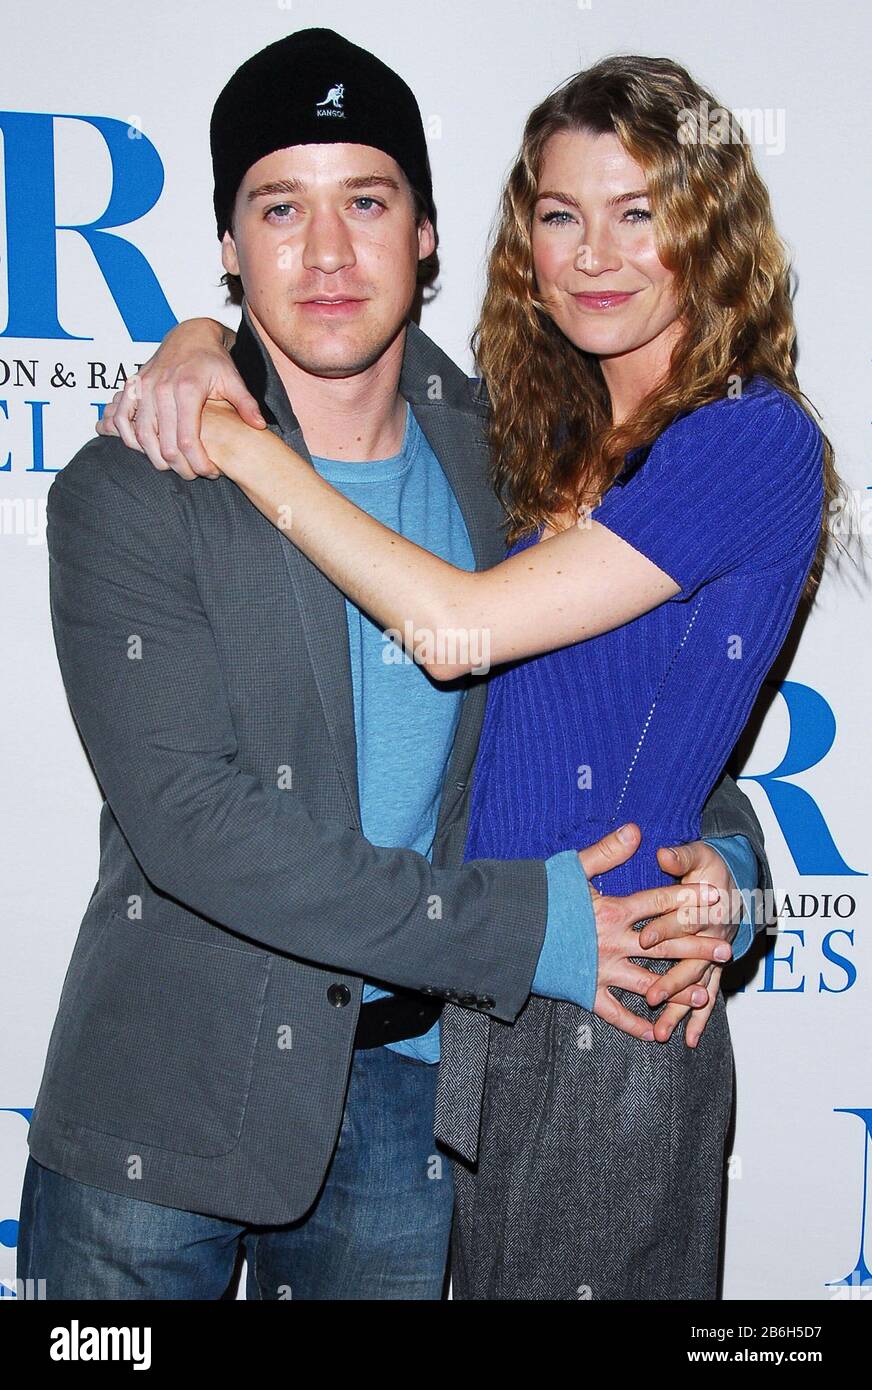 T.R. Knight and Ellen Pompeo at The 23rd Annual William S. Paley Television Festival Presents 'Grey's Anatomy' at the Directors Guild of America in West Hollywood, CA. The event took place on Tuesday, February 28, 2006. Photo by: SBM / PictureLux All Rights Reserved - File Reference #33984-1068SBMPLX Stock Photo